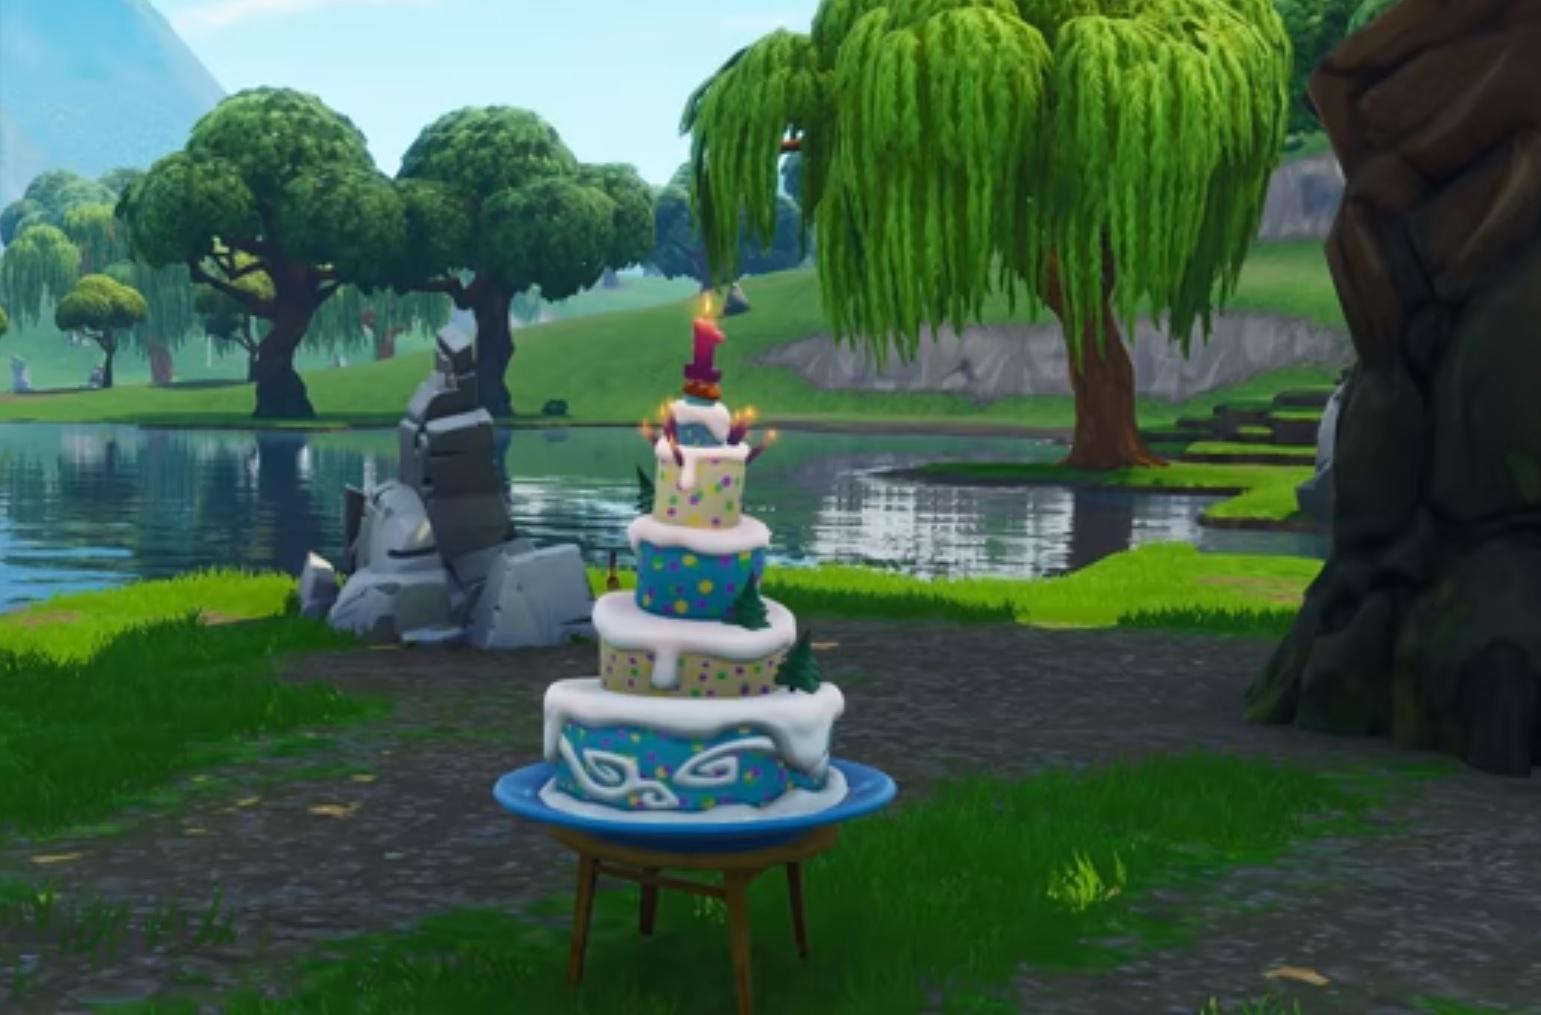 Fortnite Birthday Cake Locations: Where are the Birthday Cakes in Season 9  Map? - Daily Star